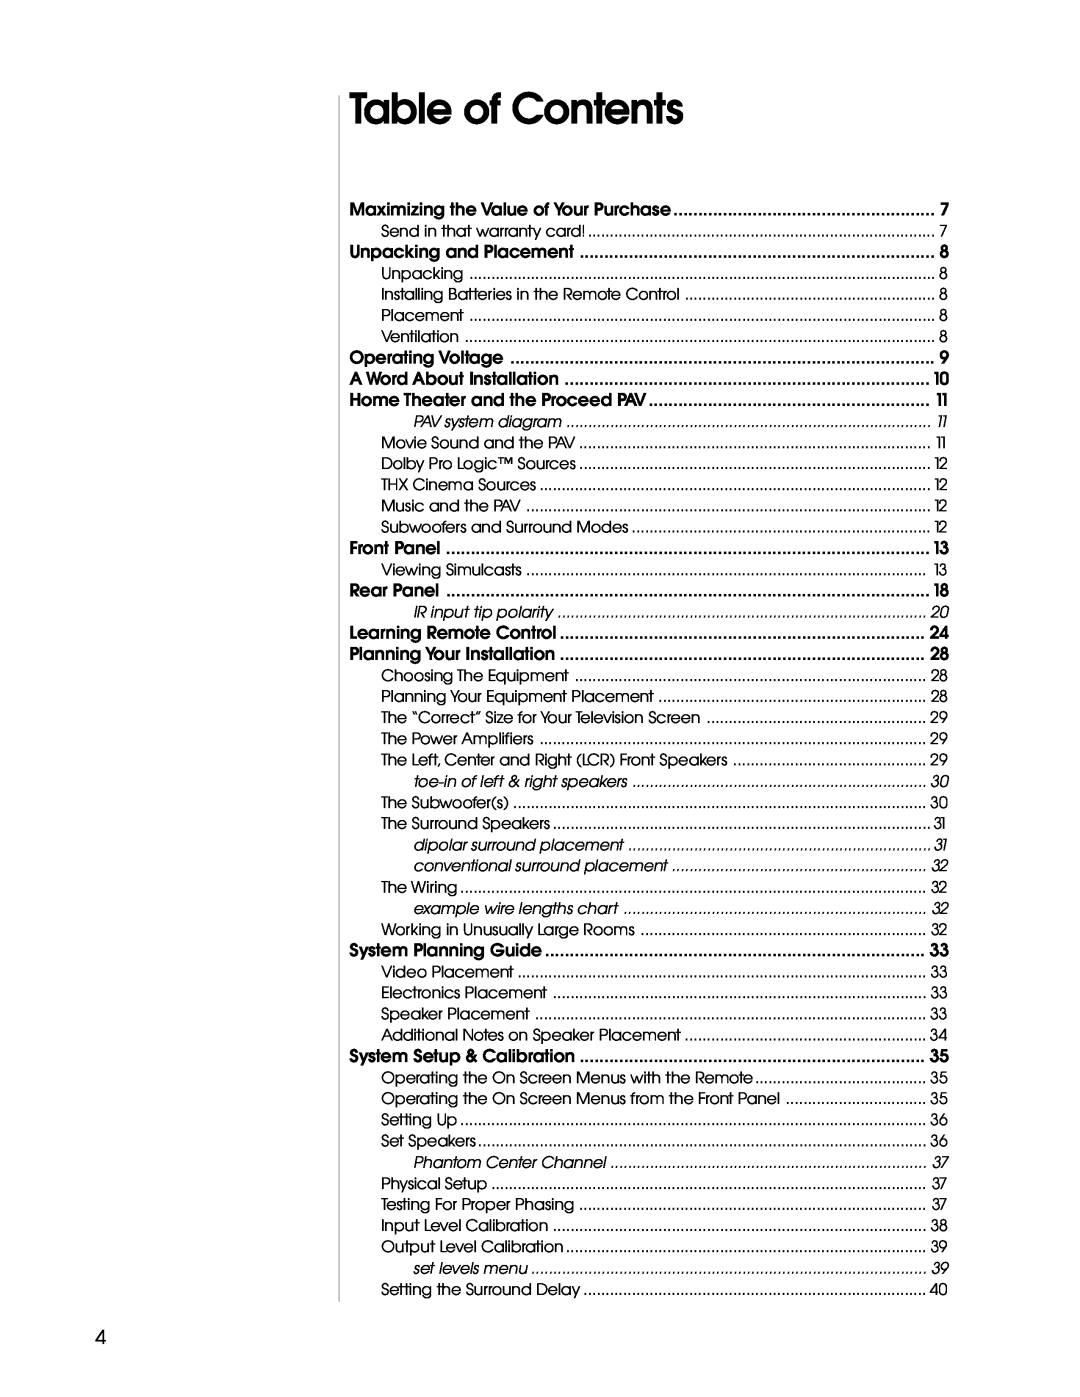 Madrigal Imaging Audio/Video Preamplifier manual Table of Contents 